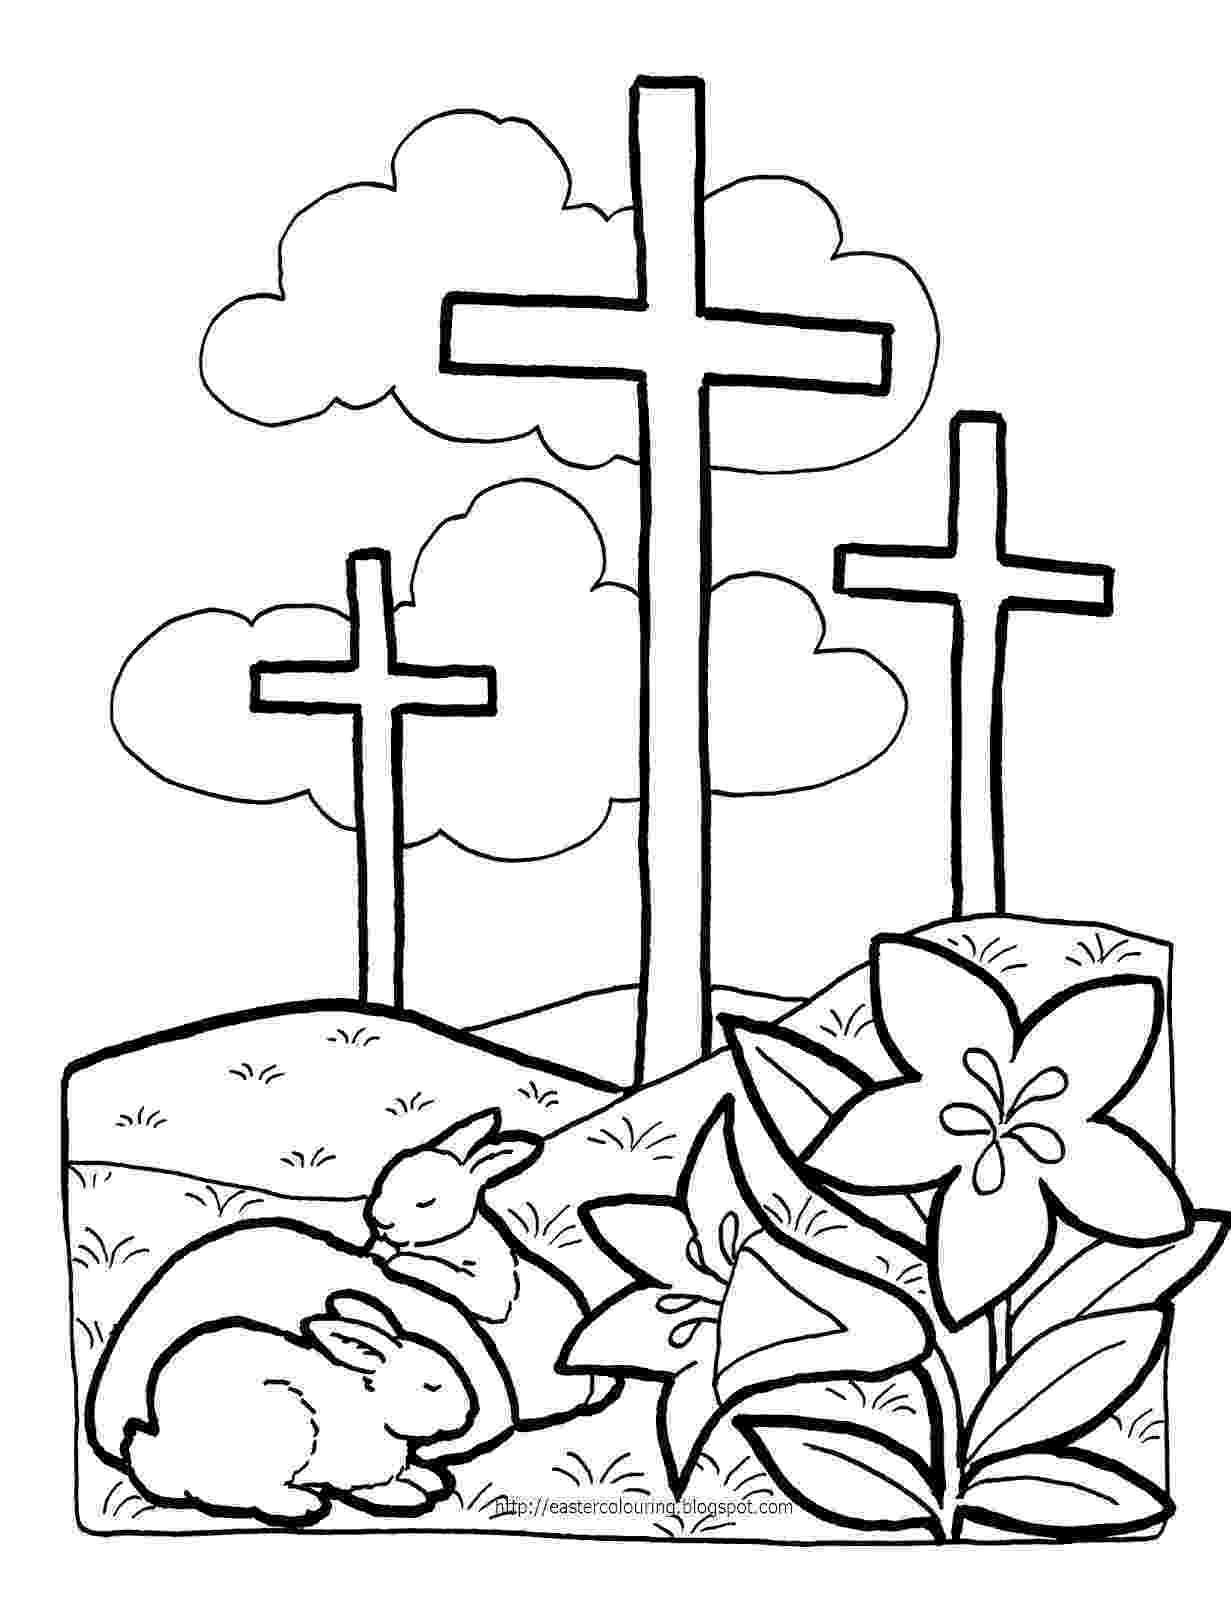 free christian coloring sheets free christian coloring pages for adults roundup bible free christian sheets coloring 